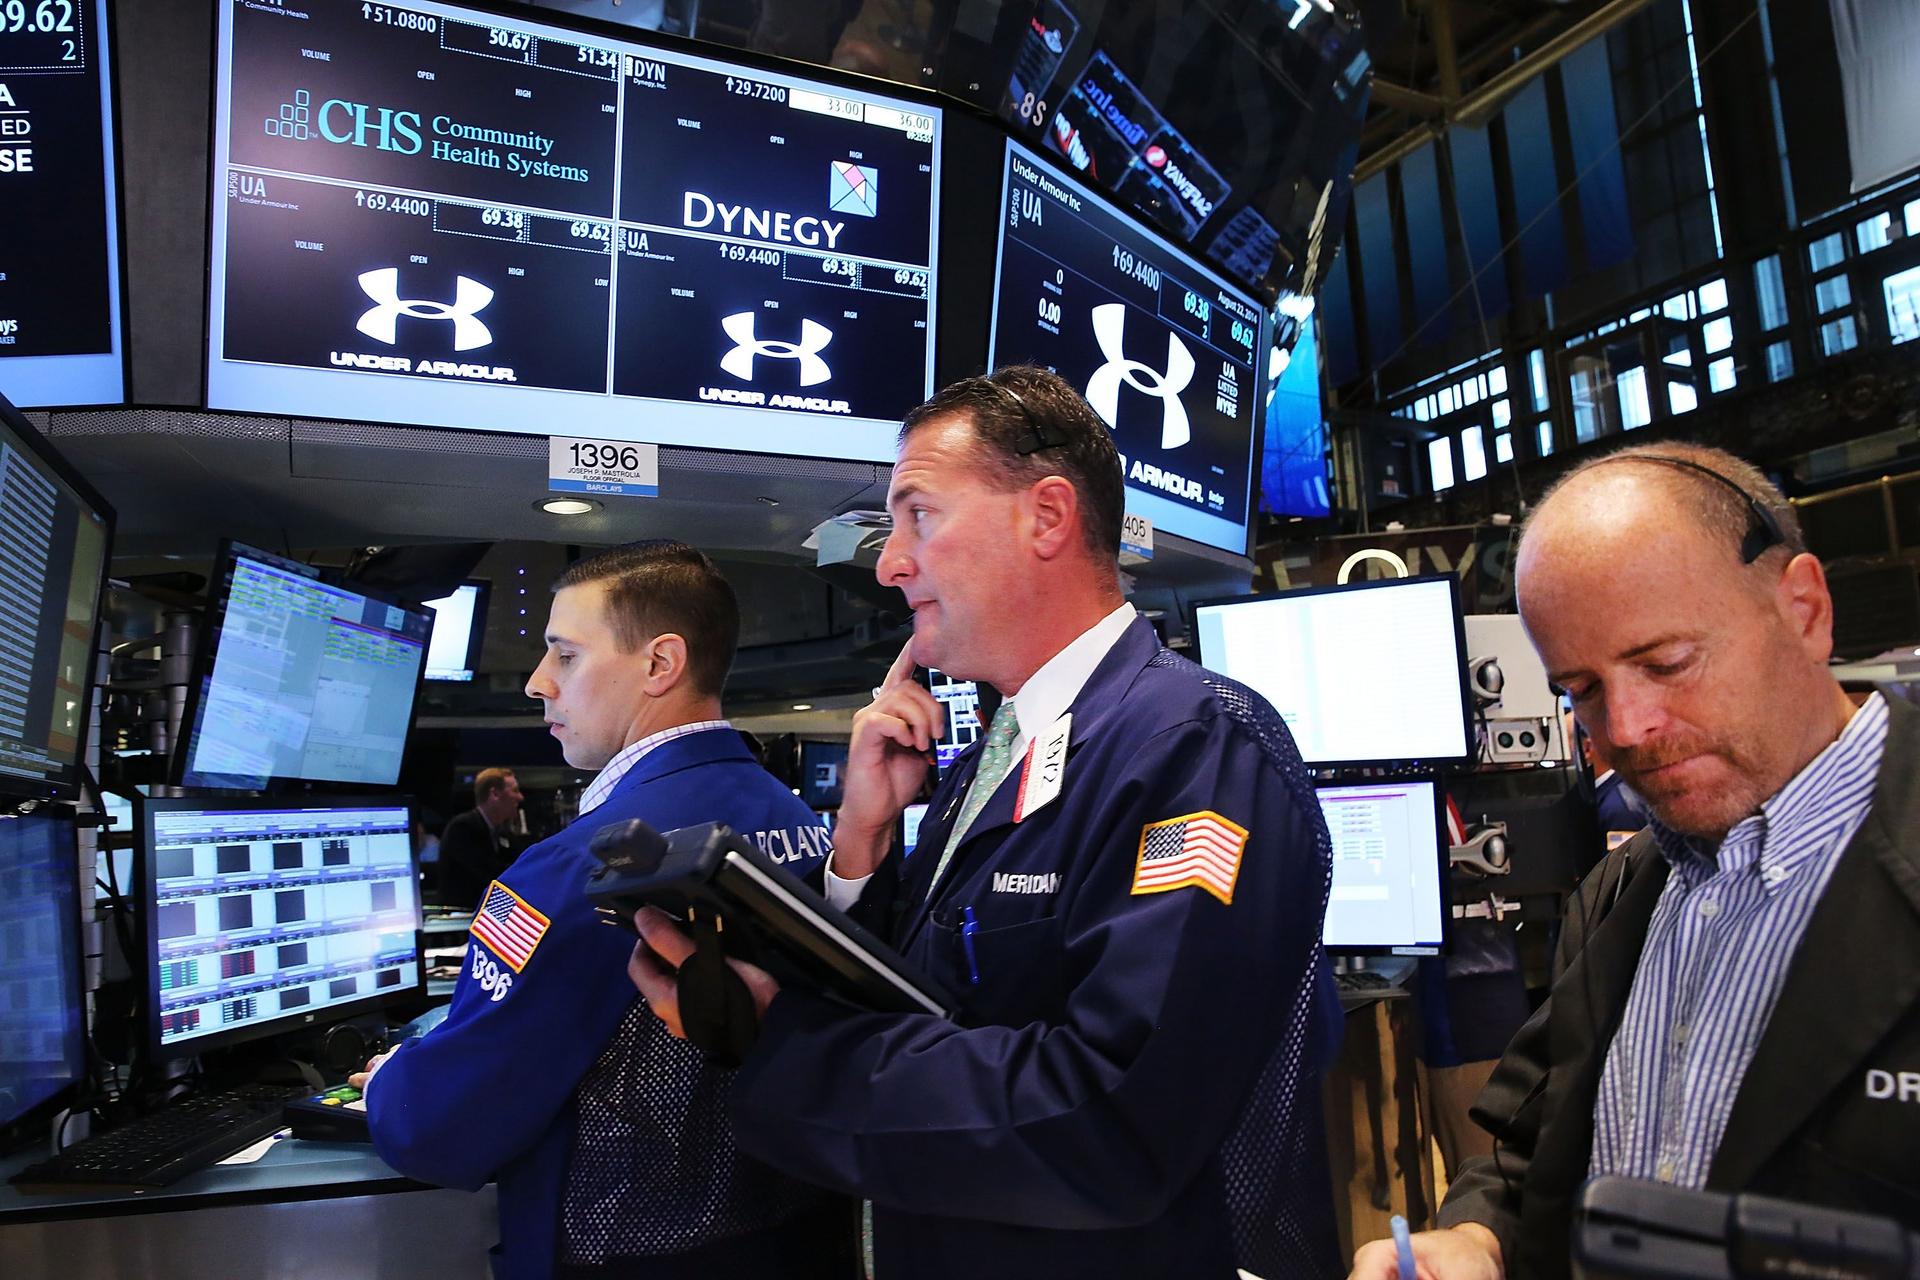 The S&amp;P 500 Index has rallied strongly on bets the Federal Reserve will support the US economy even as it strengthens. Photo: AFP